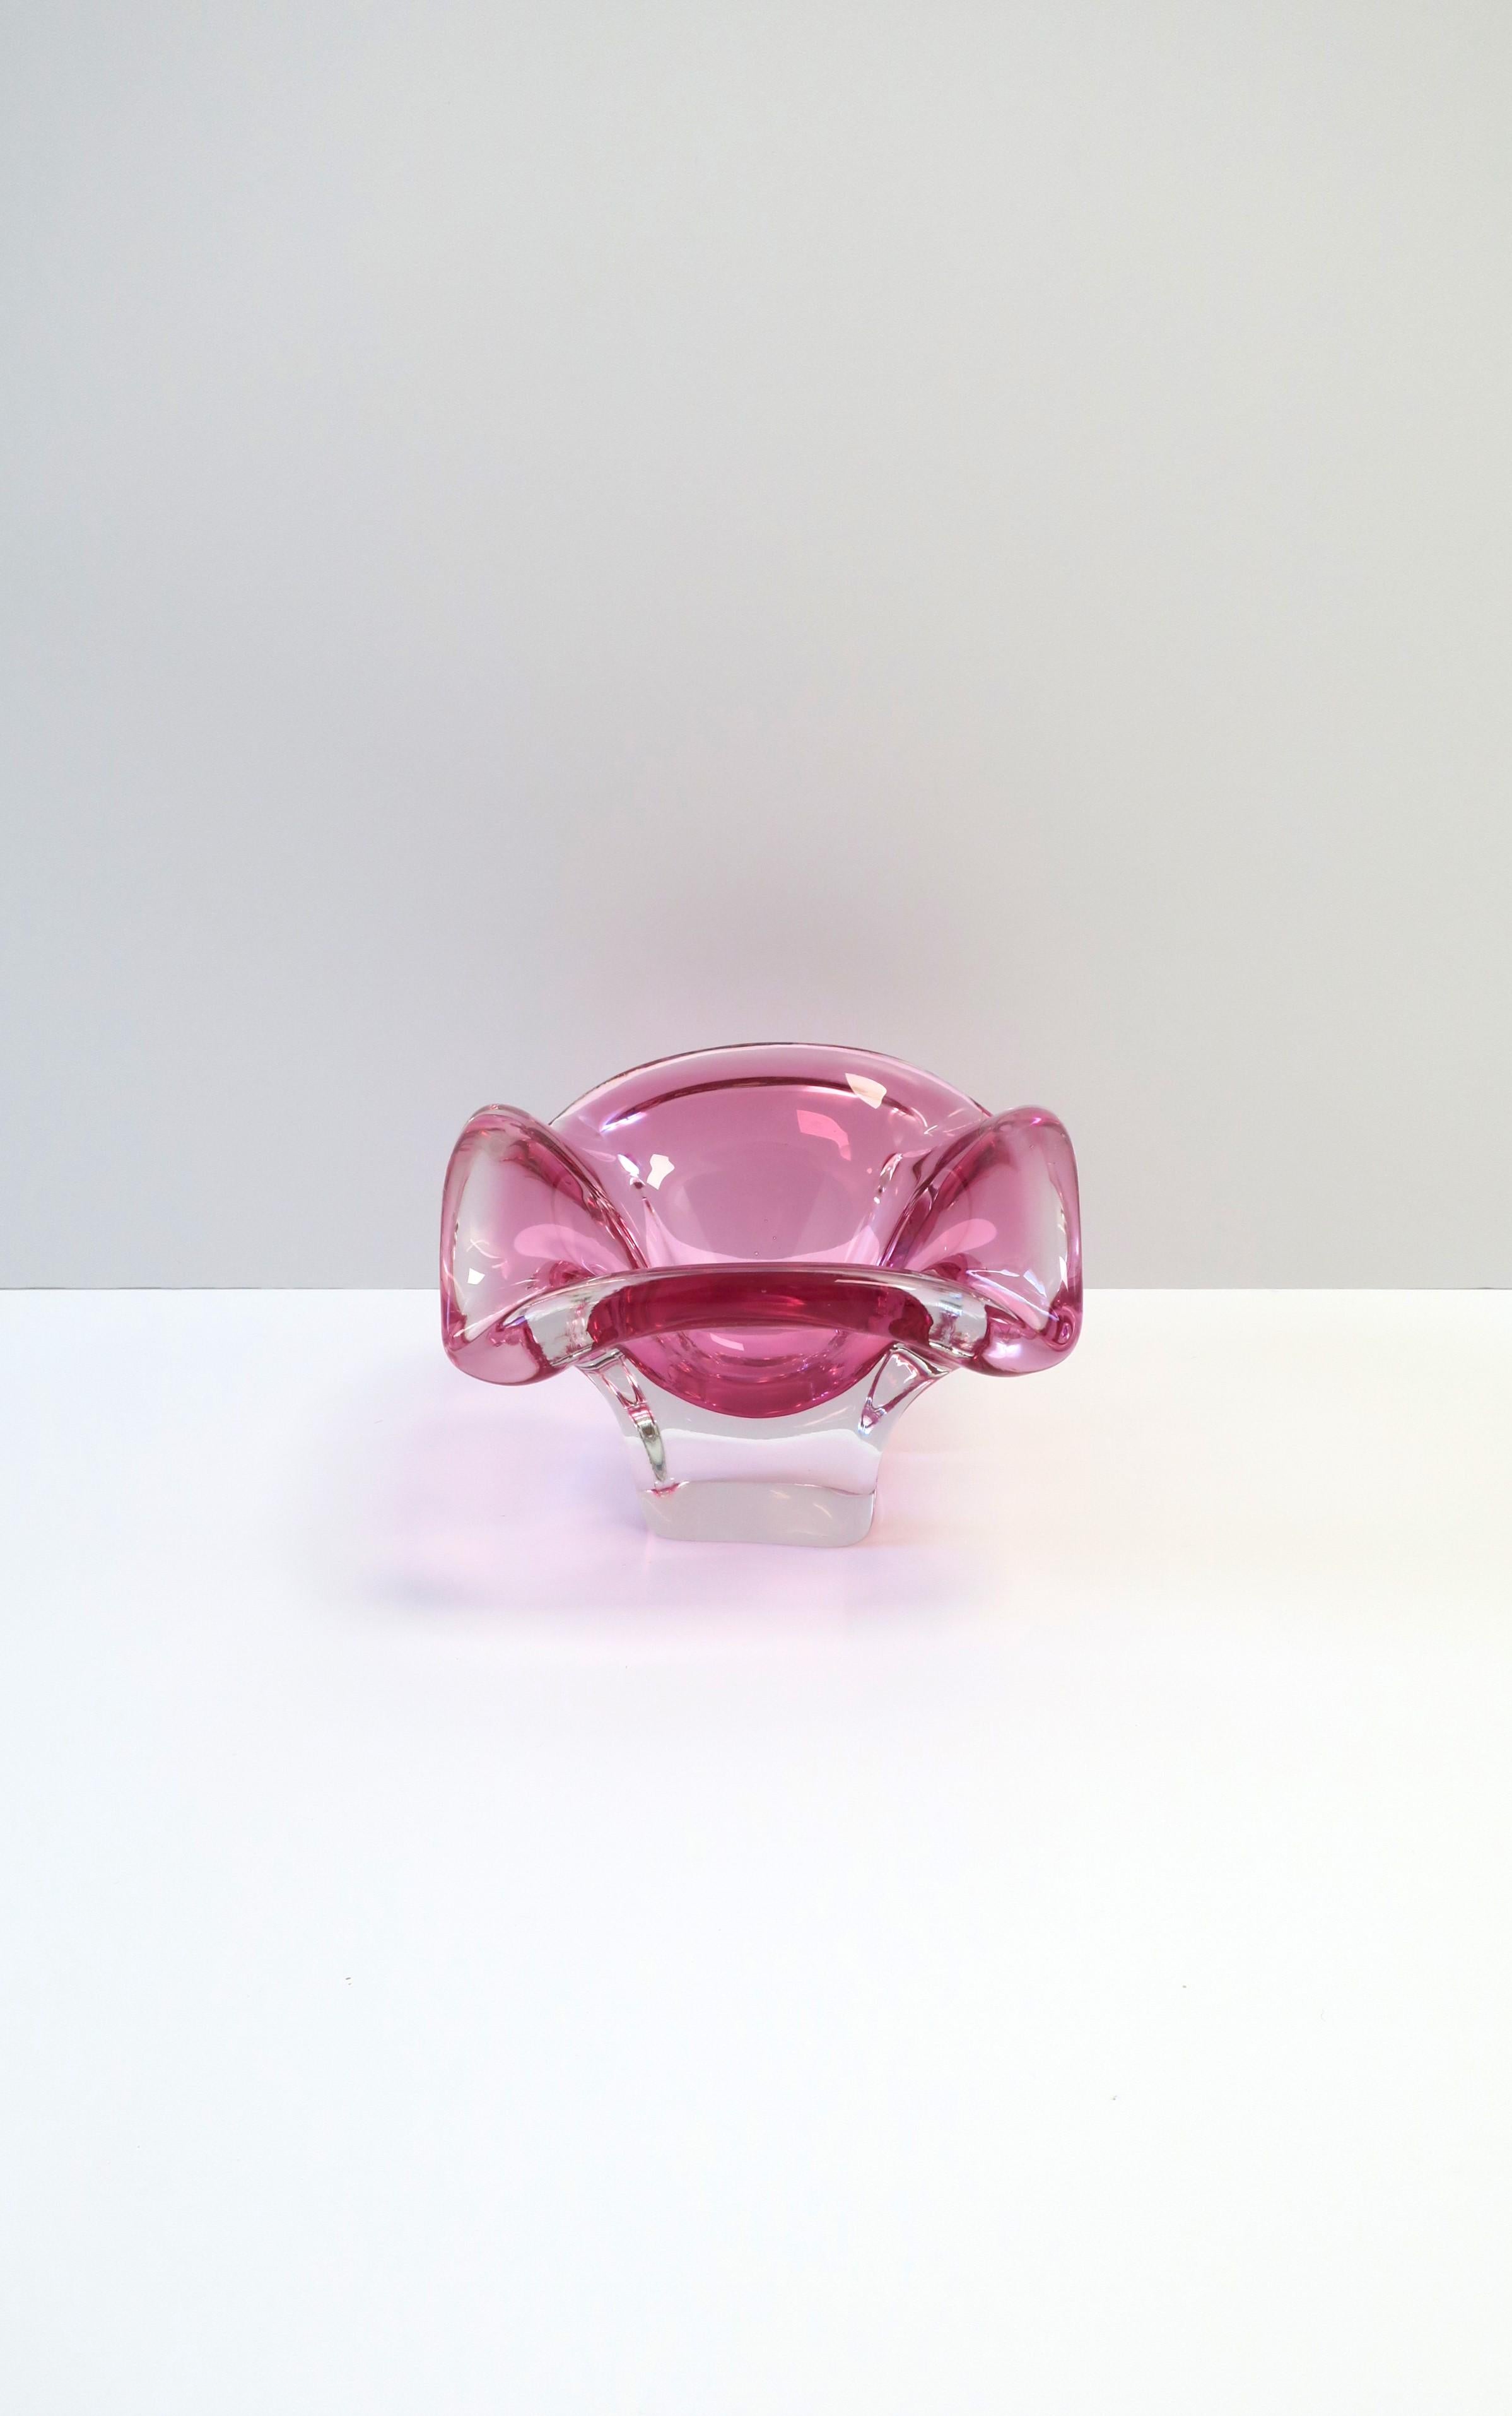 A substantial Italian Murano transparent/clear and pink art glass bowl or ashtray, circa mid-20th century, Italy. Bowl has a pedestal design, soft corners, and intendents to support a tobacco product. Bowl appears to have never been used. Beautiful